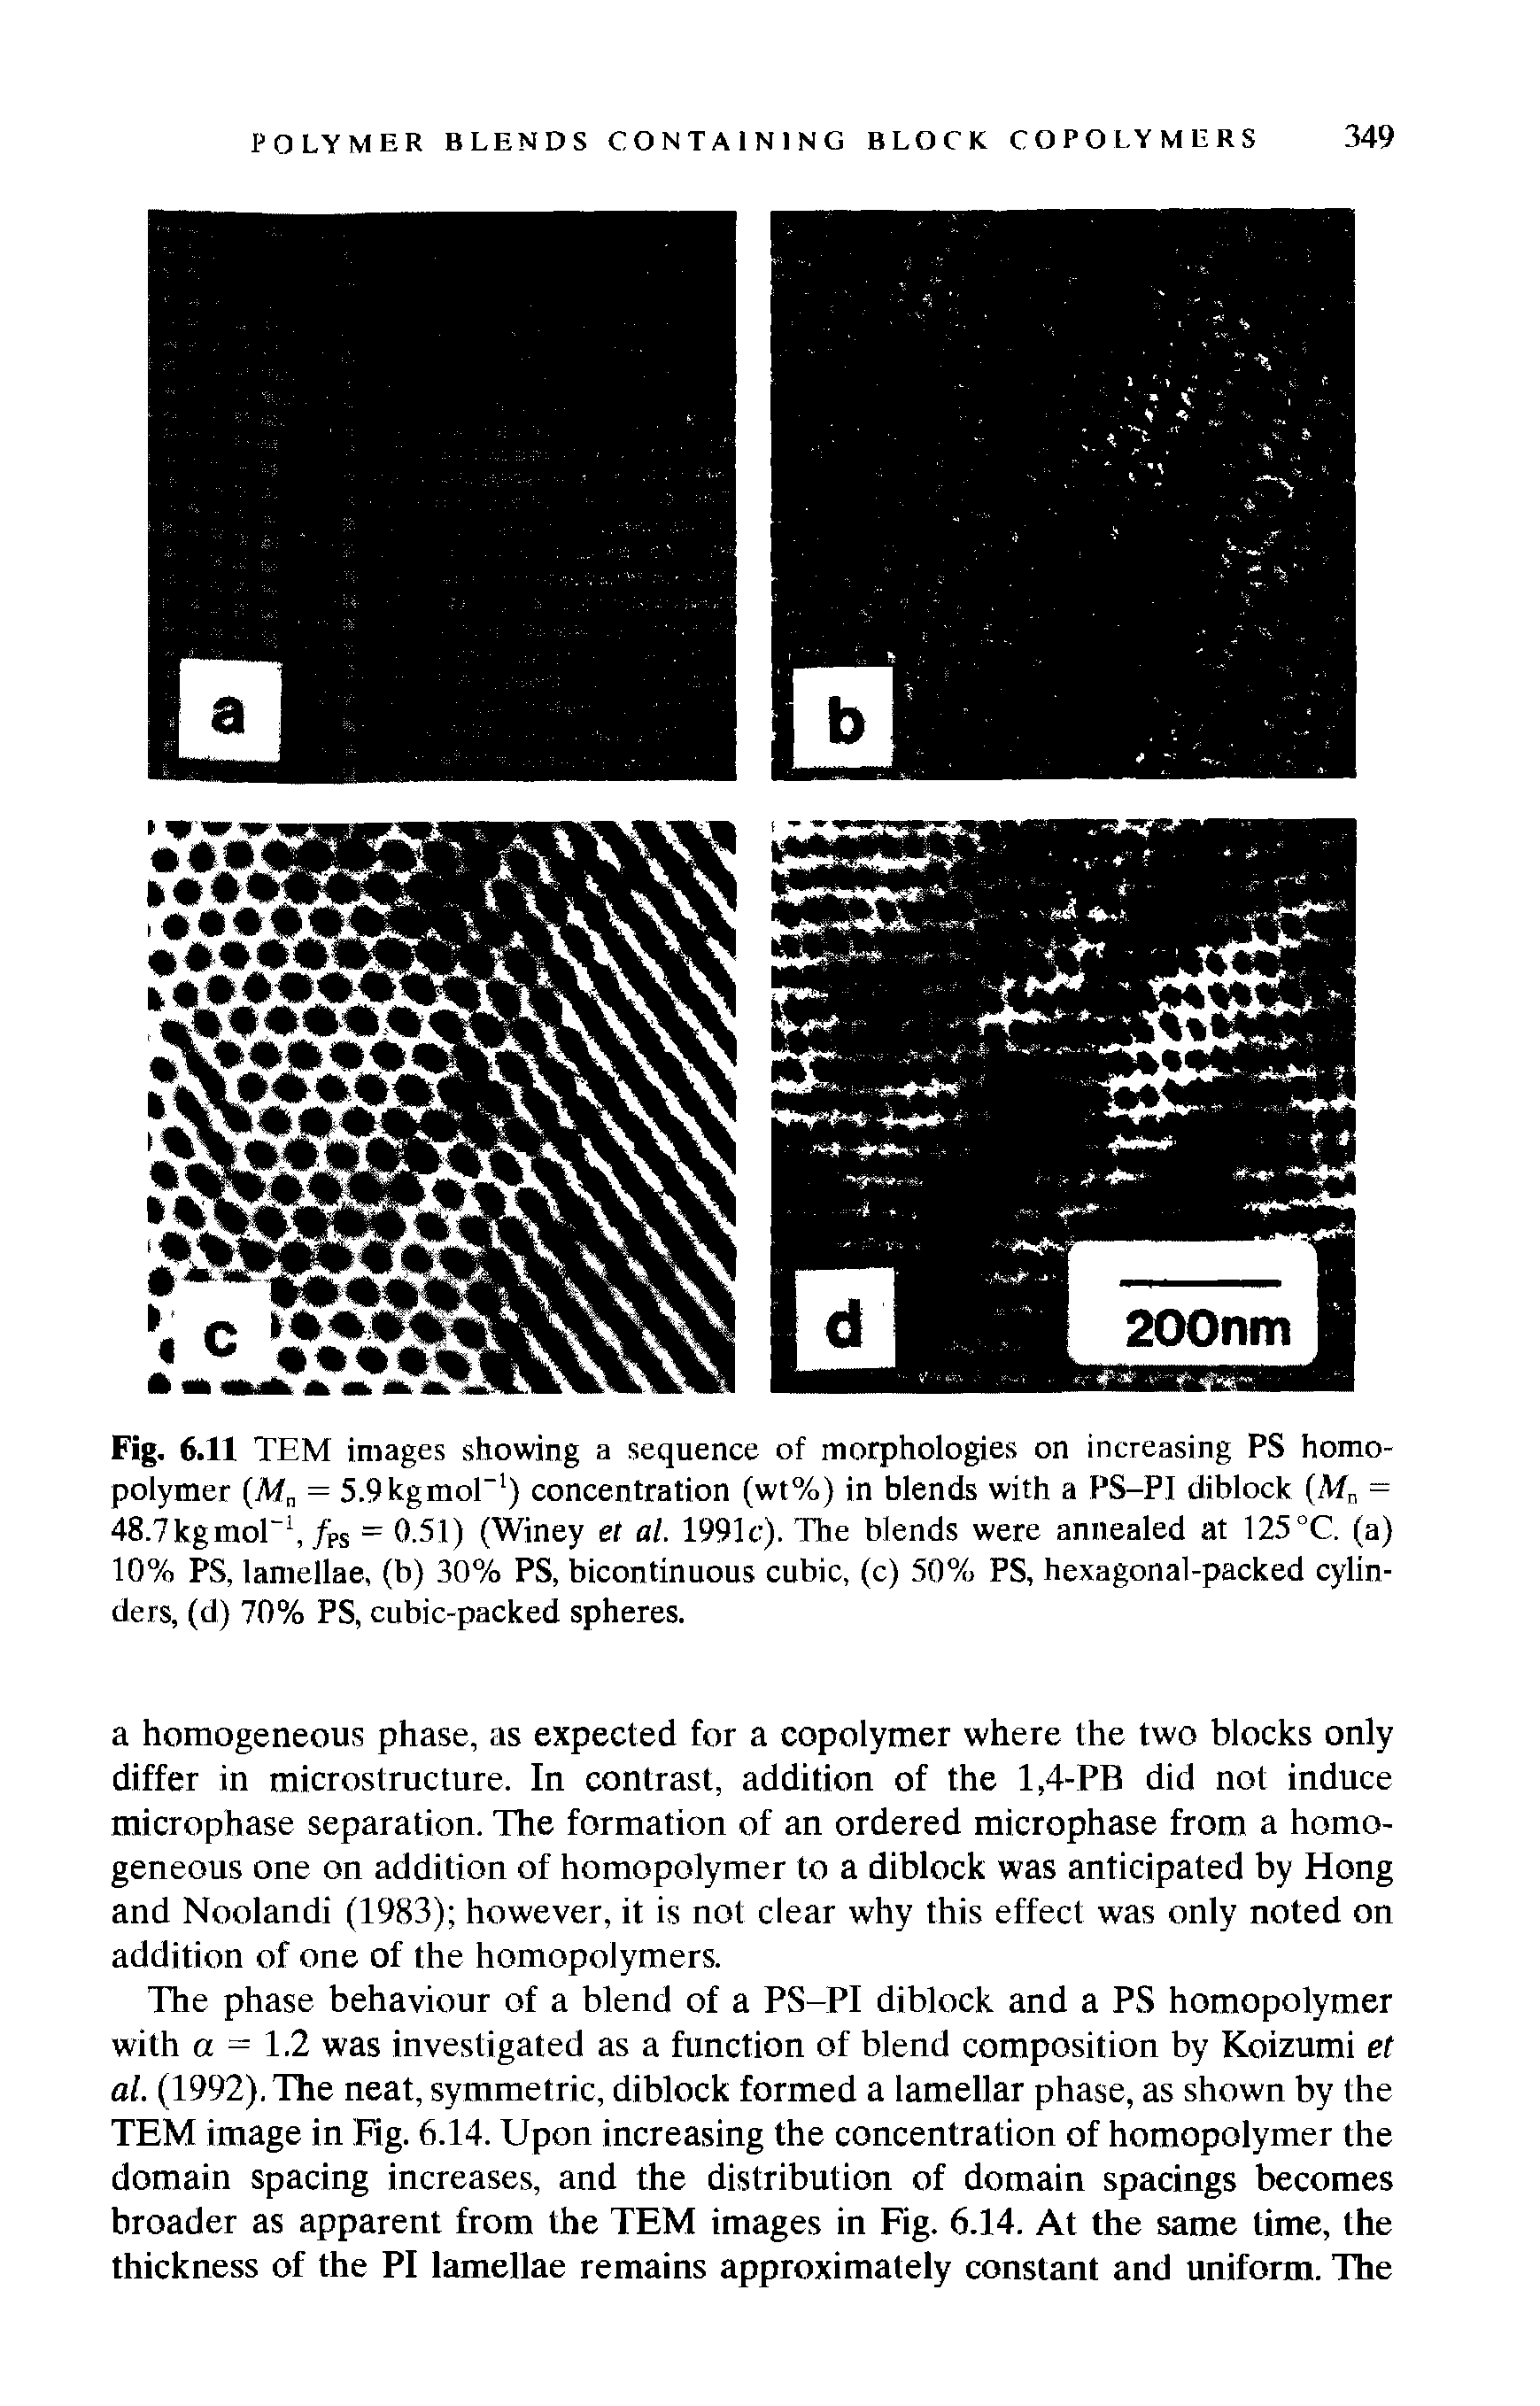 Fig. 6.11 TEM images showing a sequence of morphologies on increasing PS homopolymer (M = 5.9kgmor ) concentration (wt%) in blends with a PS-PI diblock (Mr = 48.7kgmol-1,/PS = 0.51) (Winey et al. 1991c). The blends were annealed at 125 °C. (a) 10% PS, lamellae, (b) 30% PS, bicontinuous cubic, (c) 50% PS, hexagonal-packed cylinders, (d) 70% PS, cubic-packed spheres.